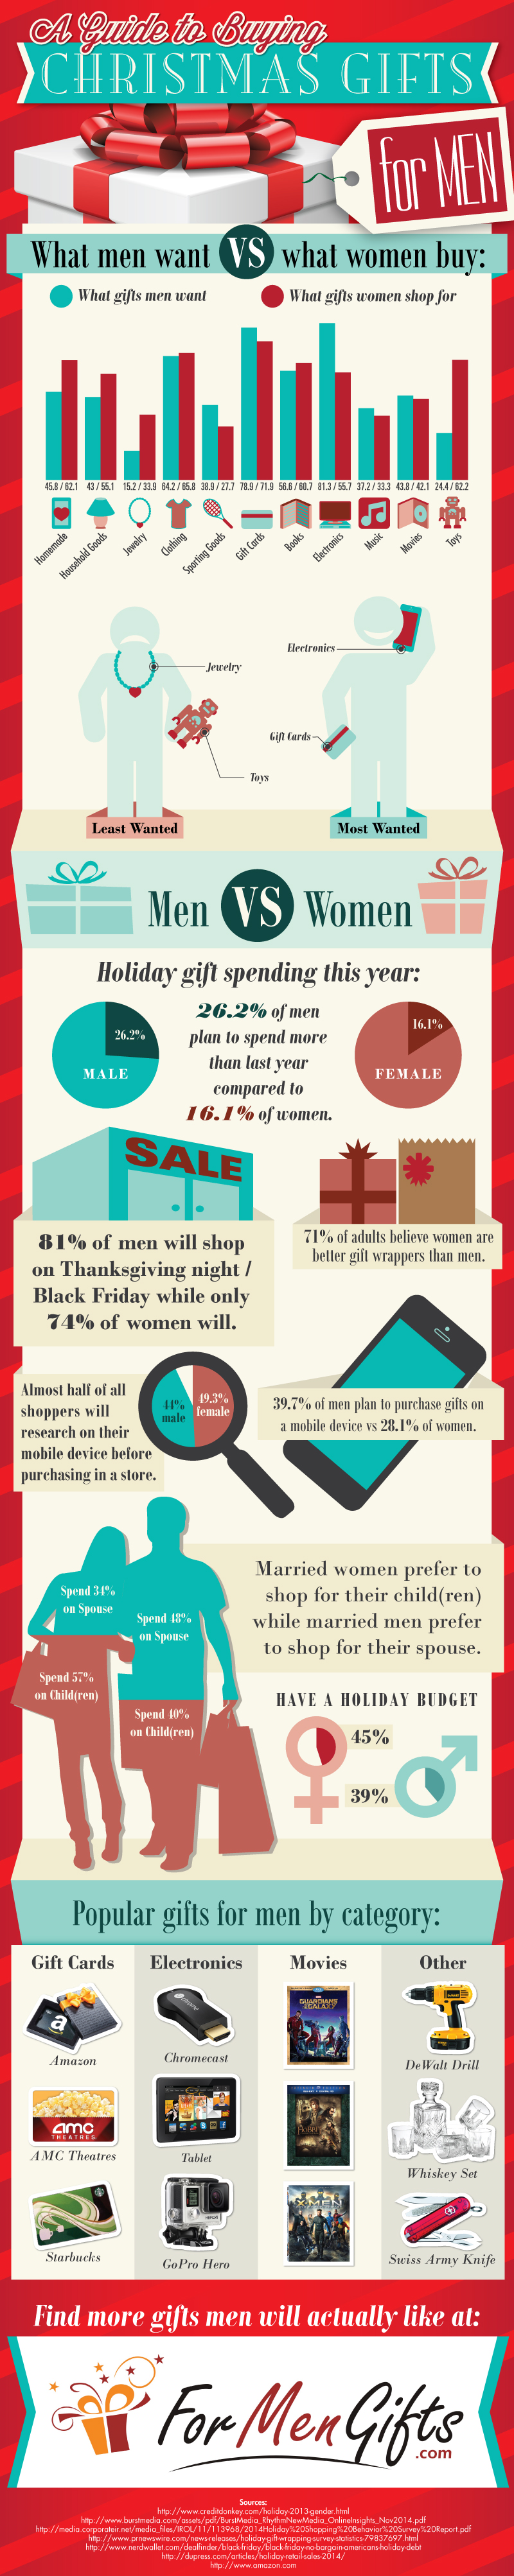 Christmas Gifts for Men Buying Guide Infographic